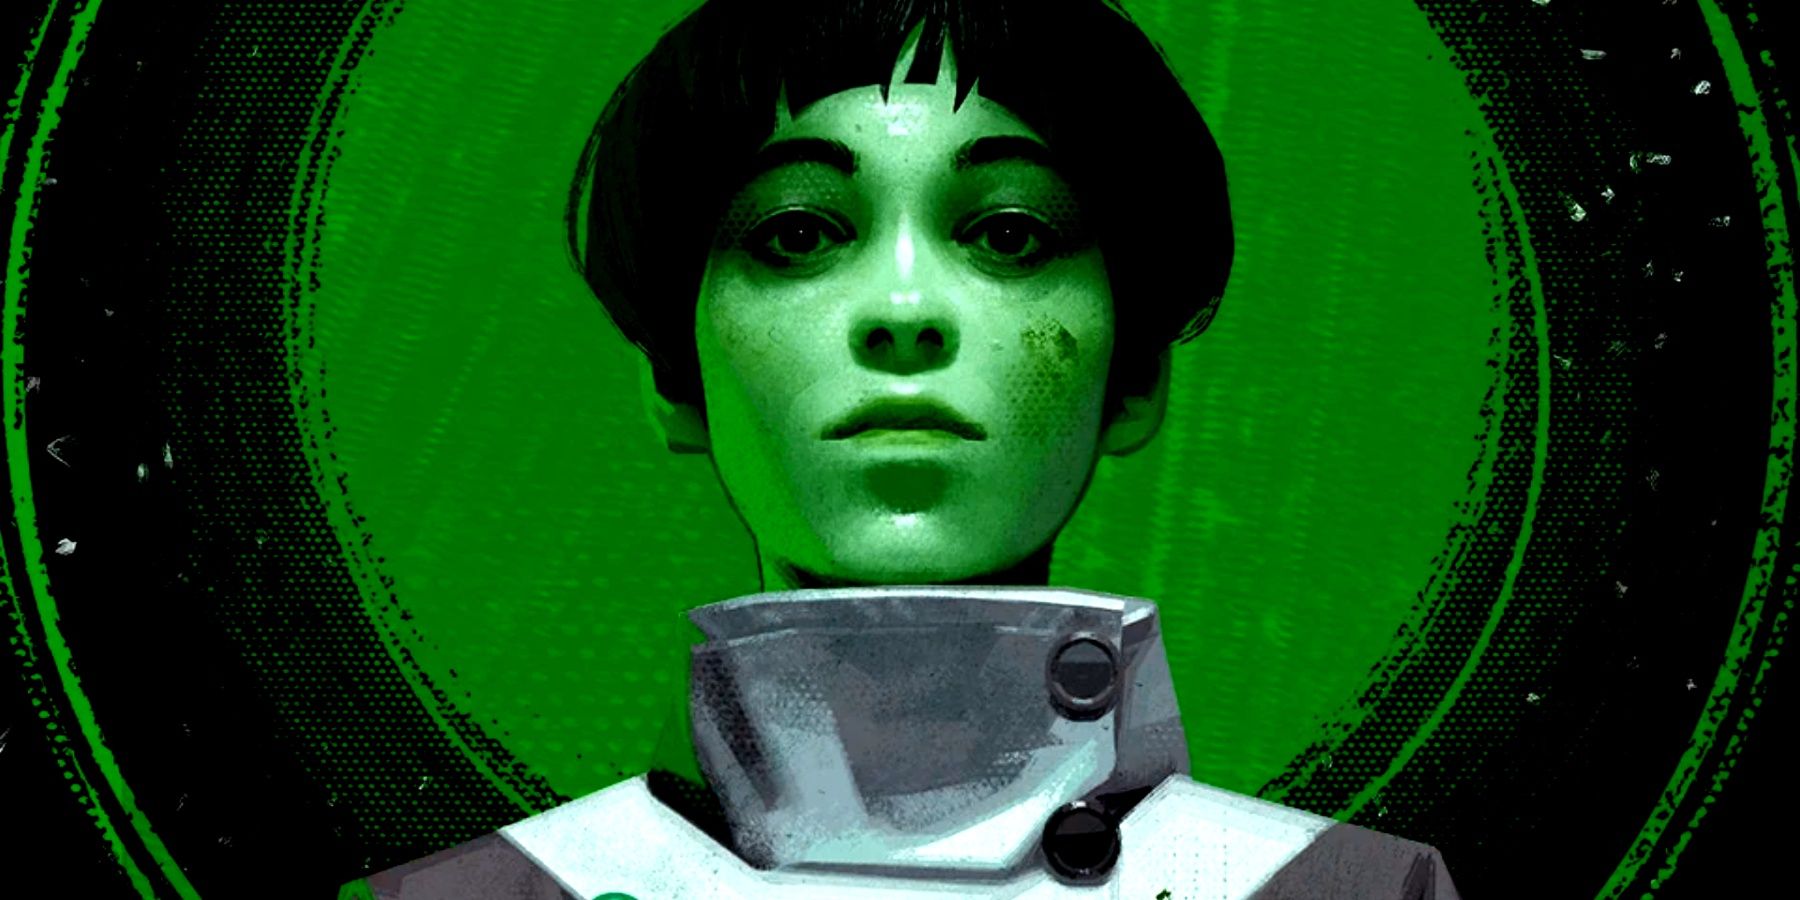 Deathloop visionary Harriet with a green filter